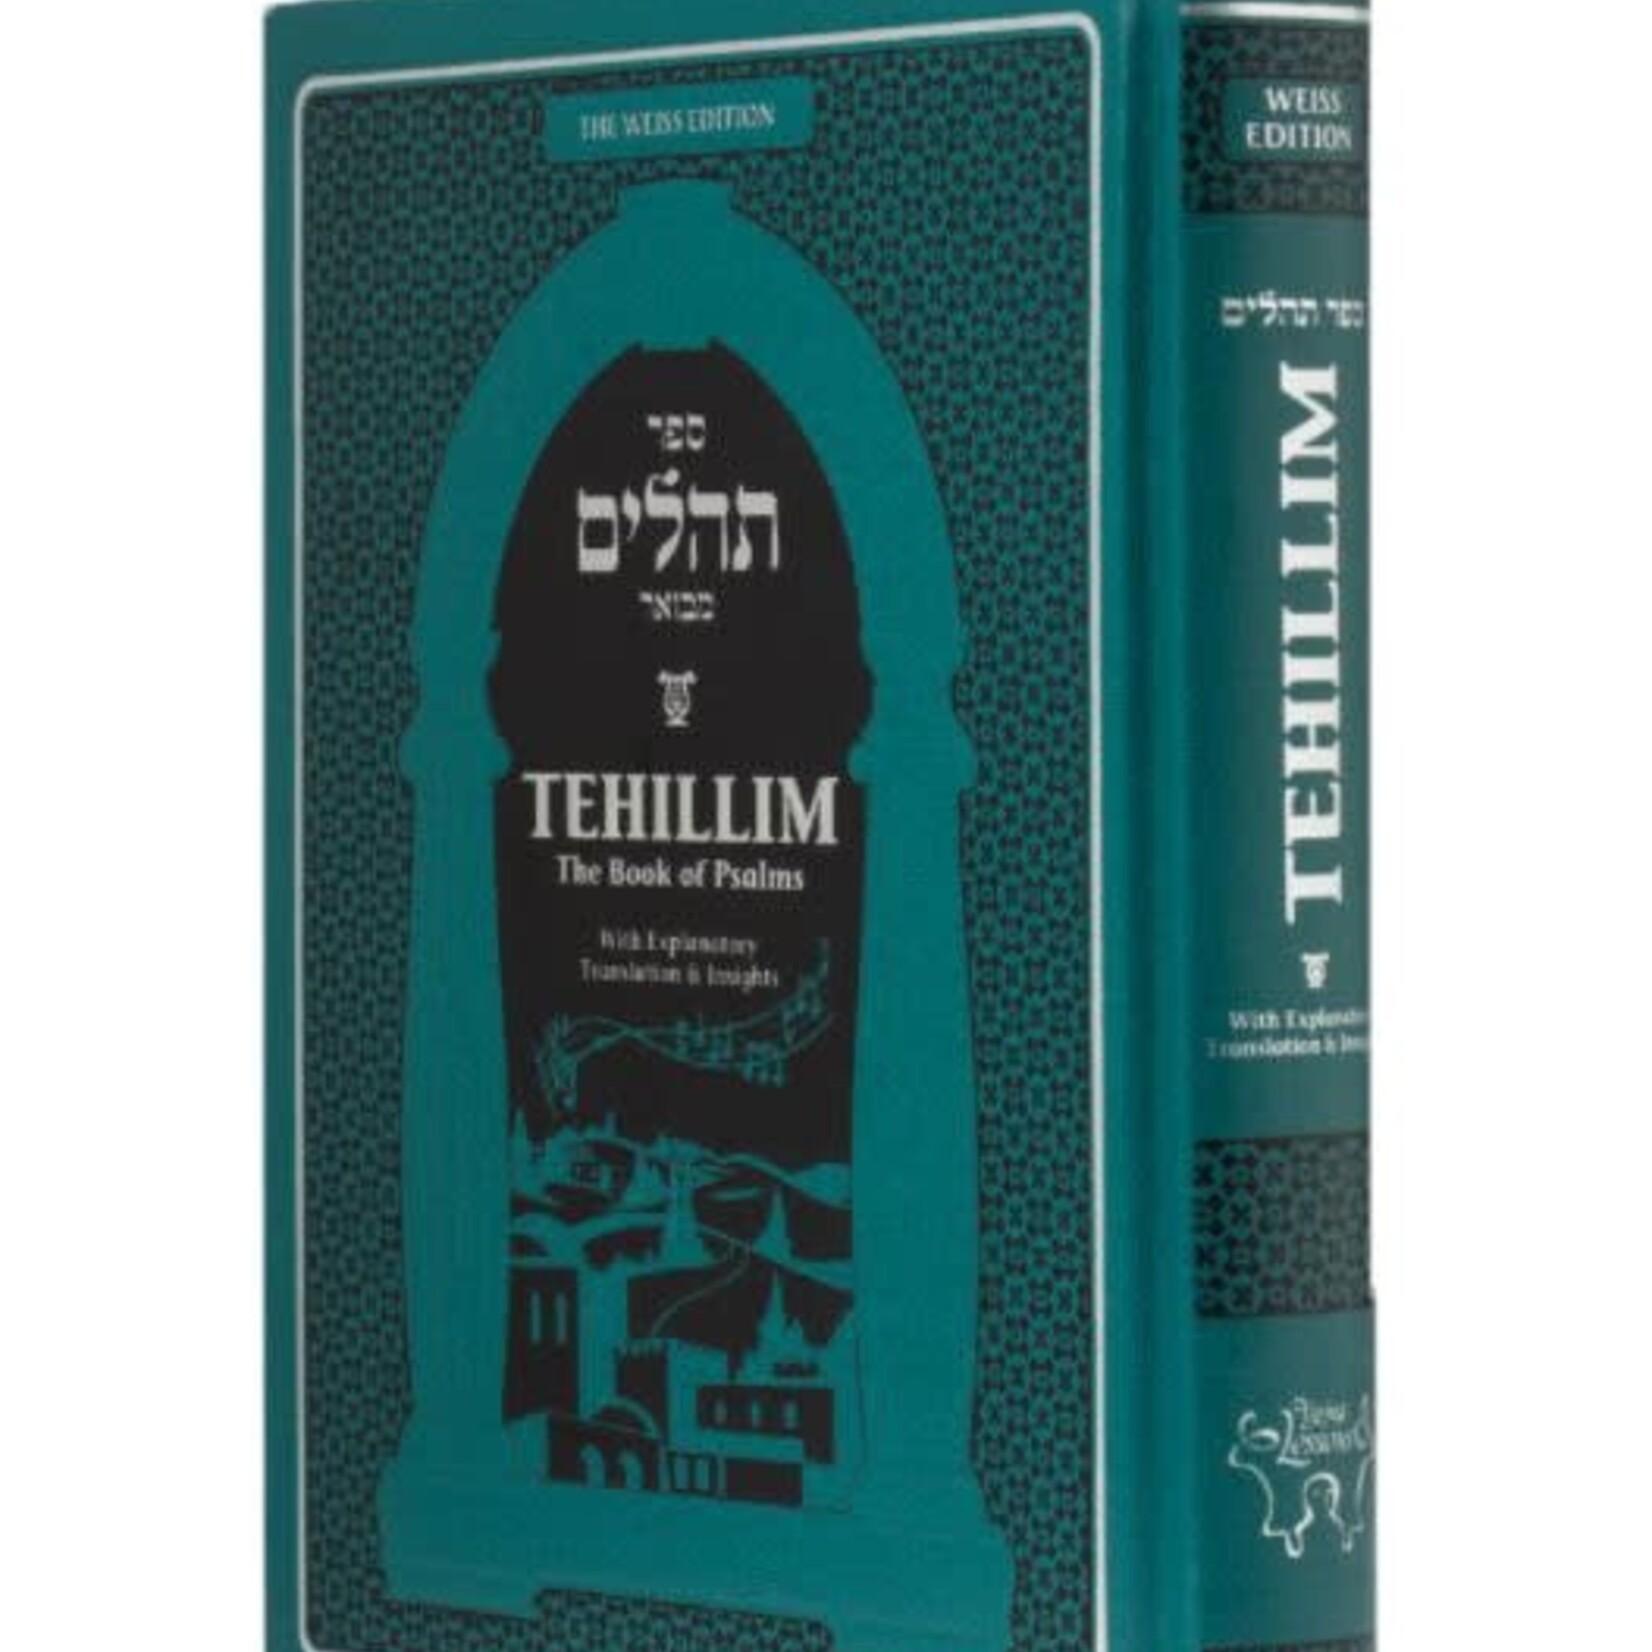 Weiss Edition Tehillim Hebrew English Turquoise [Hardcover]